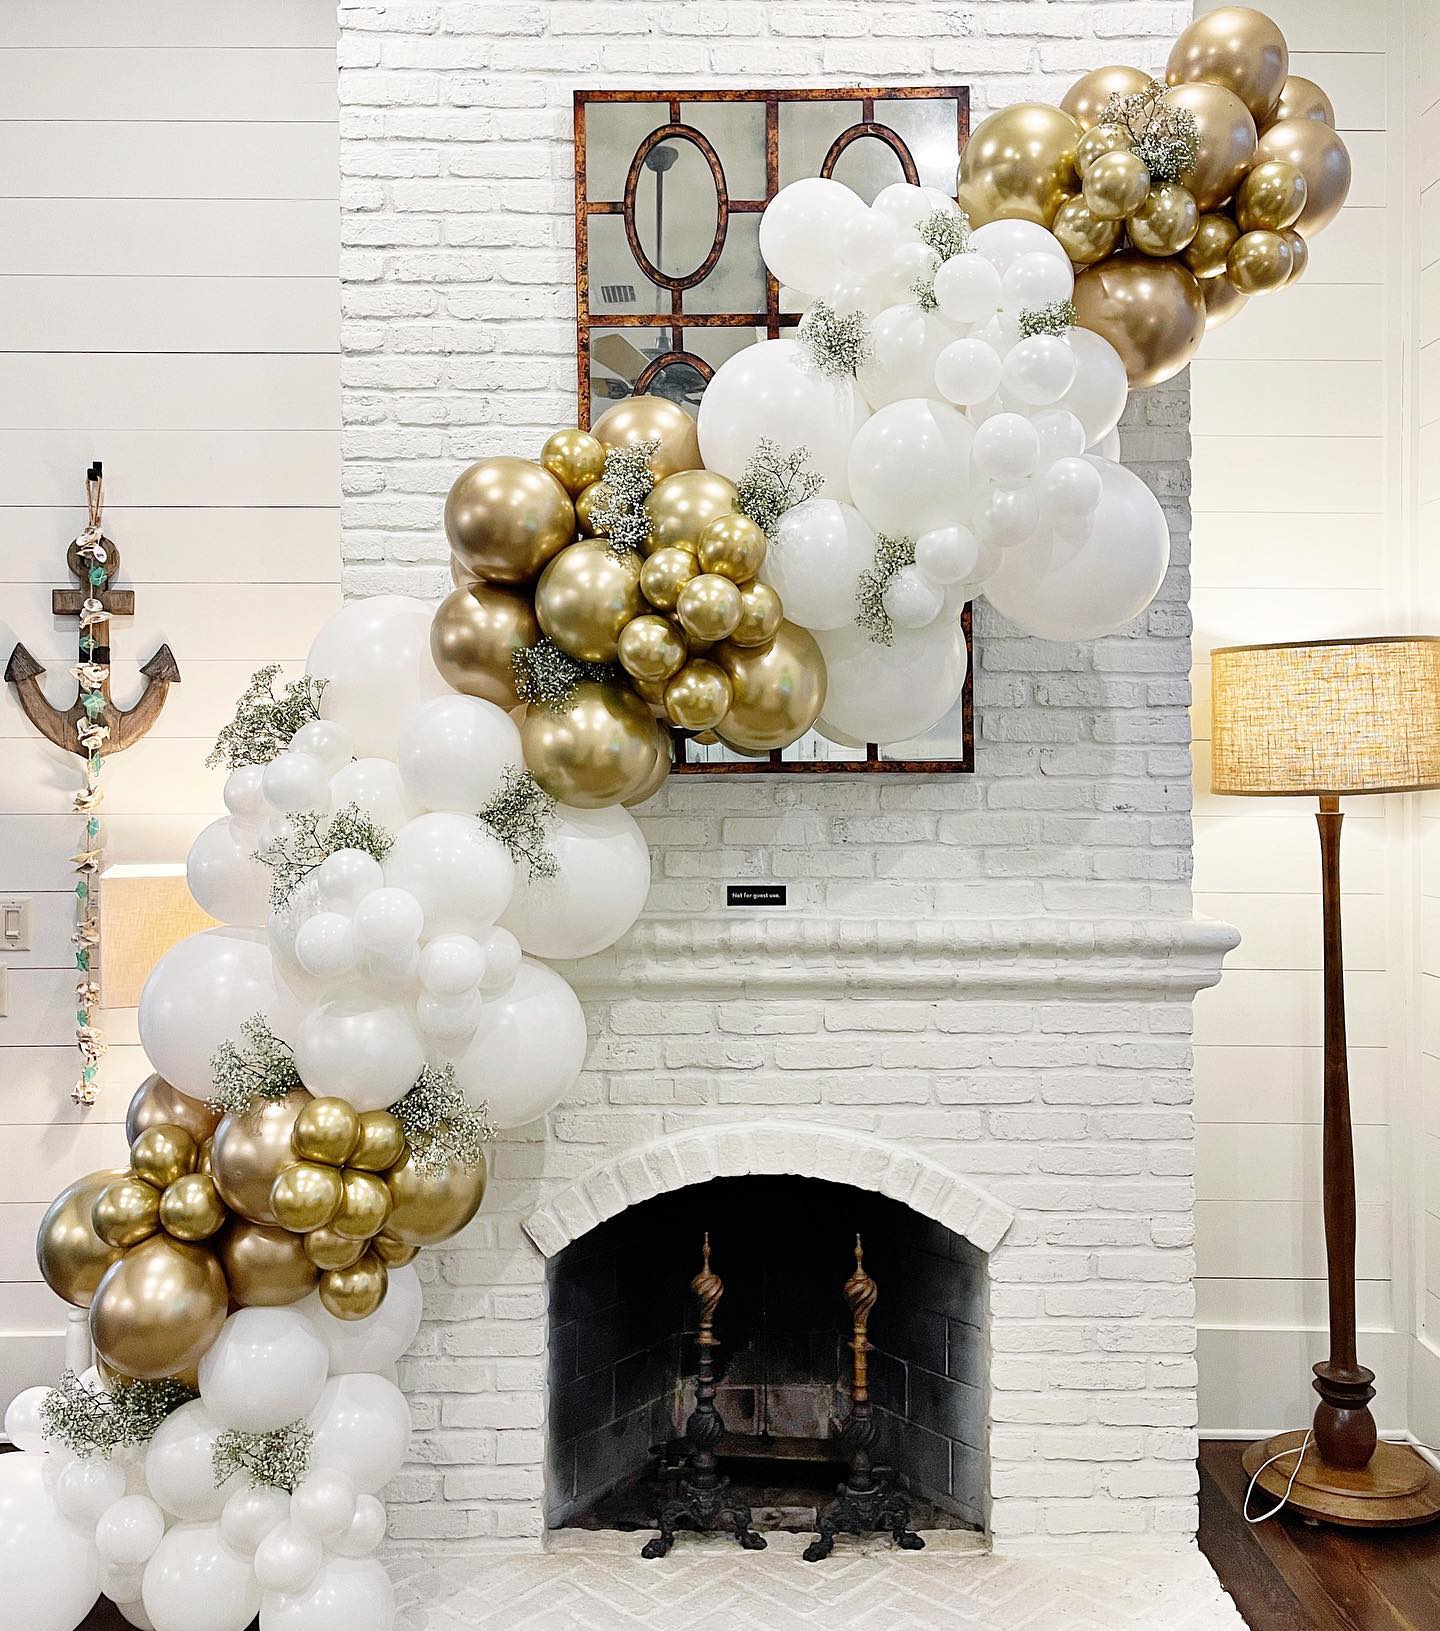 The perfect backdrop decor for your bridal brunch and the “getting ready” bridal team photos! 

#weddingballoons #organicballoons #balloongarland #balloondecor #bridetobe #bridalbrunch #balloonstylist #30awedding #watercolorfl #30aballoons #balloons #eventstylist #partystylist